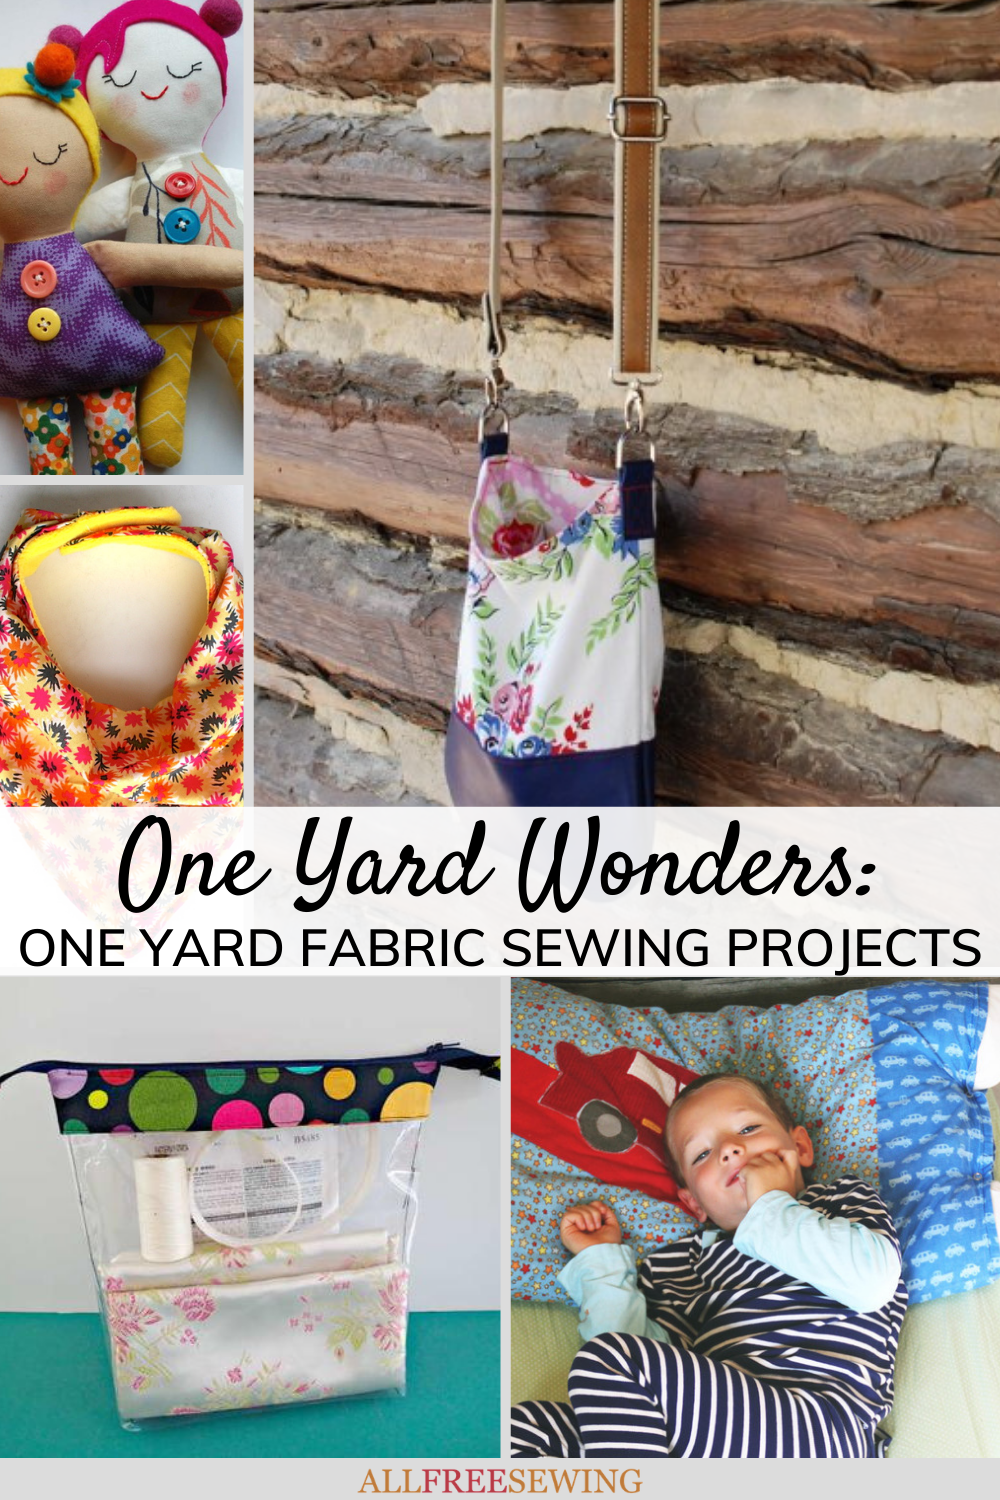 100+ Sewing Projects by the Yard